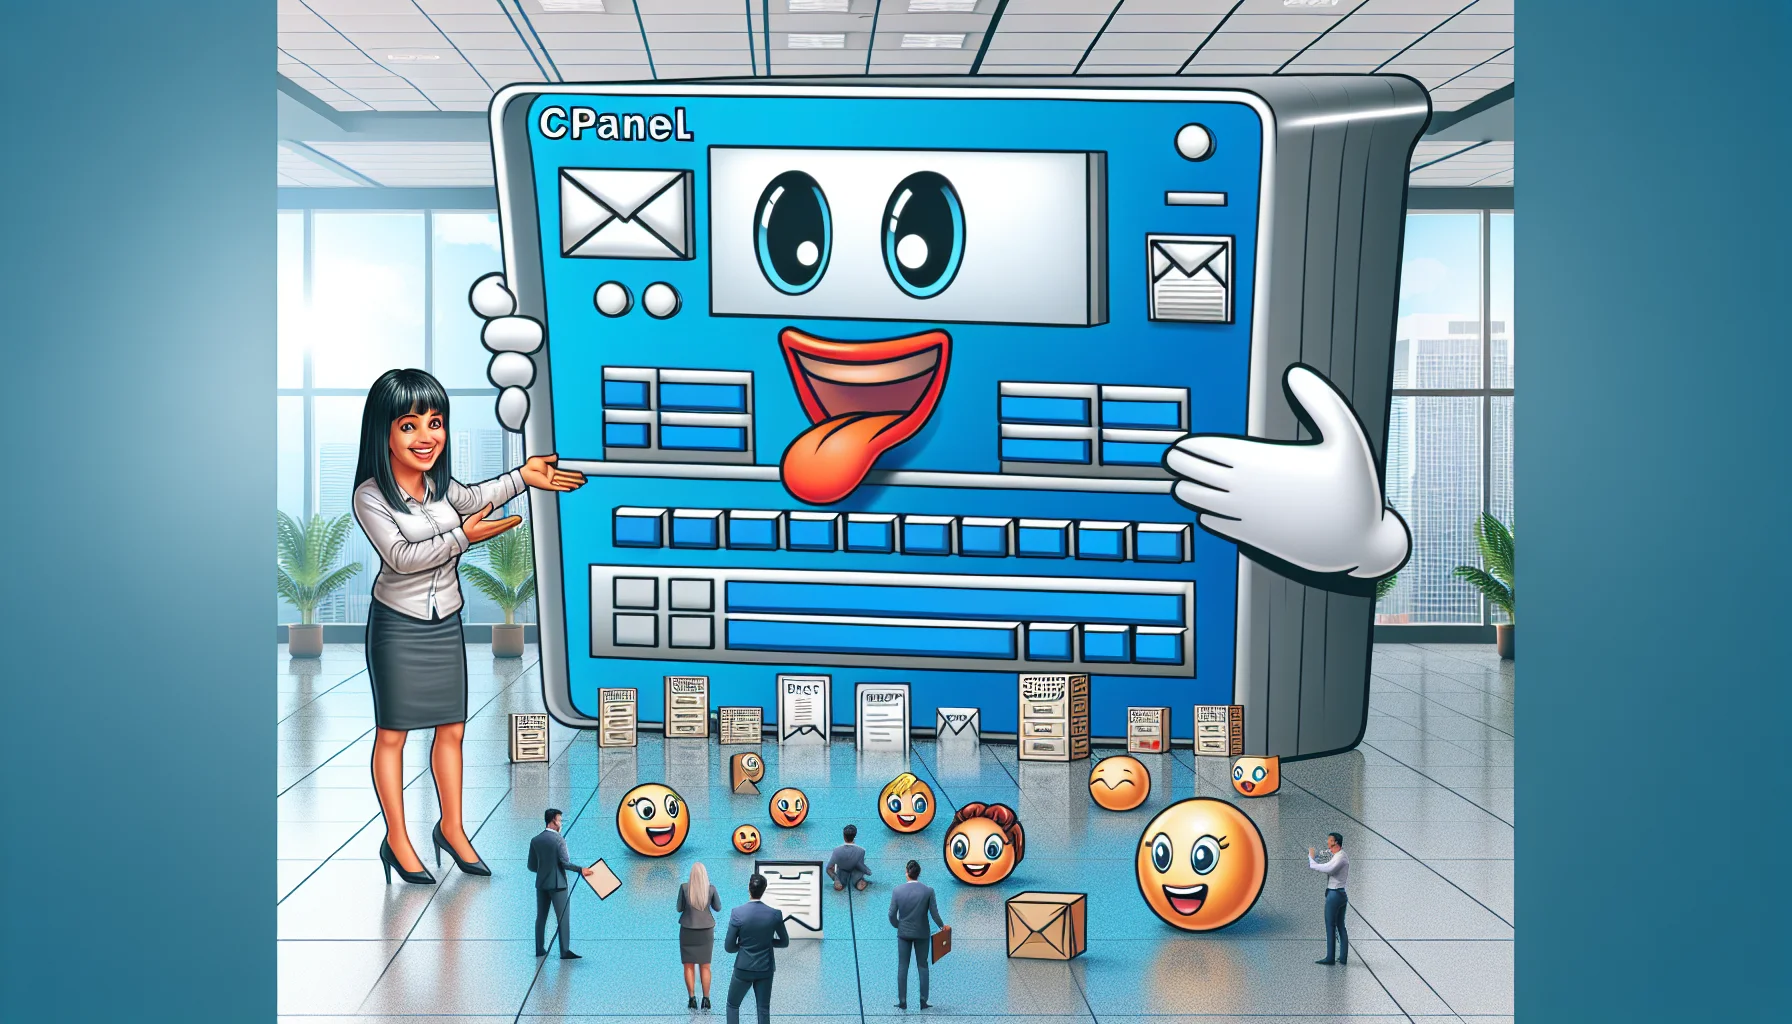 Draw an amusing image that portrays a situation related to cPanel Email Hosting for web. Set the scene in a brightly lit corporate office where a cheerful and smart-looking Hispanic female system administrator is introducing a massive literal cPanel that's five times larger than her. The panel is illustrated as a creative personification of a typical email feature: it has a postbox for a mouth, keyboard keys for teeth, and the cPanel logo on its forehead. Around the floor, depict various website icons depicted as small, interactive creatures seemingly excited to gather around the cPanel. The image should exude an inviting and fun energy, in order to make web hosting services enticing.